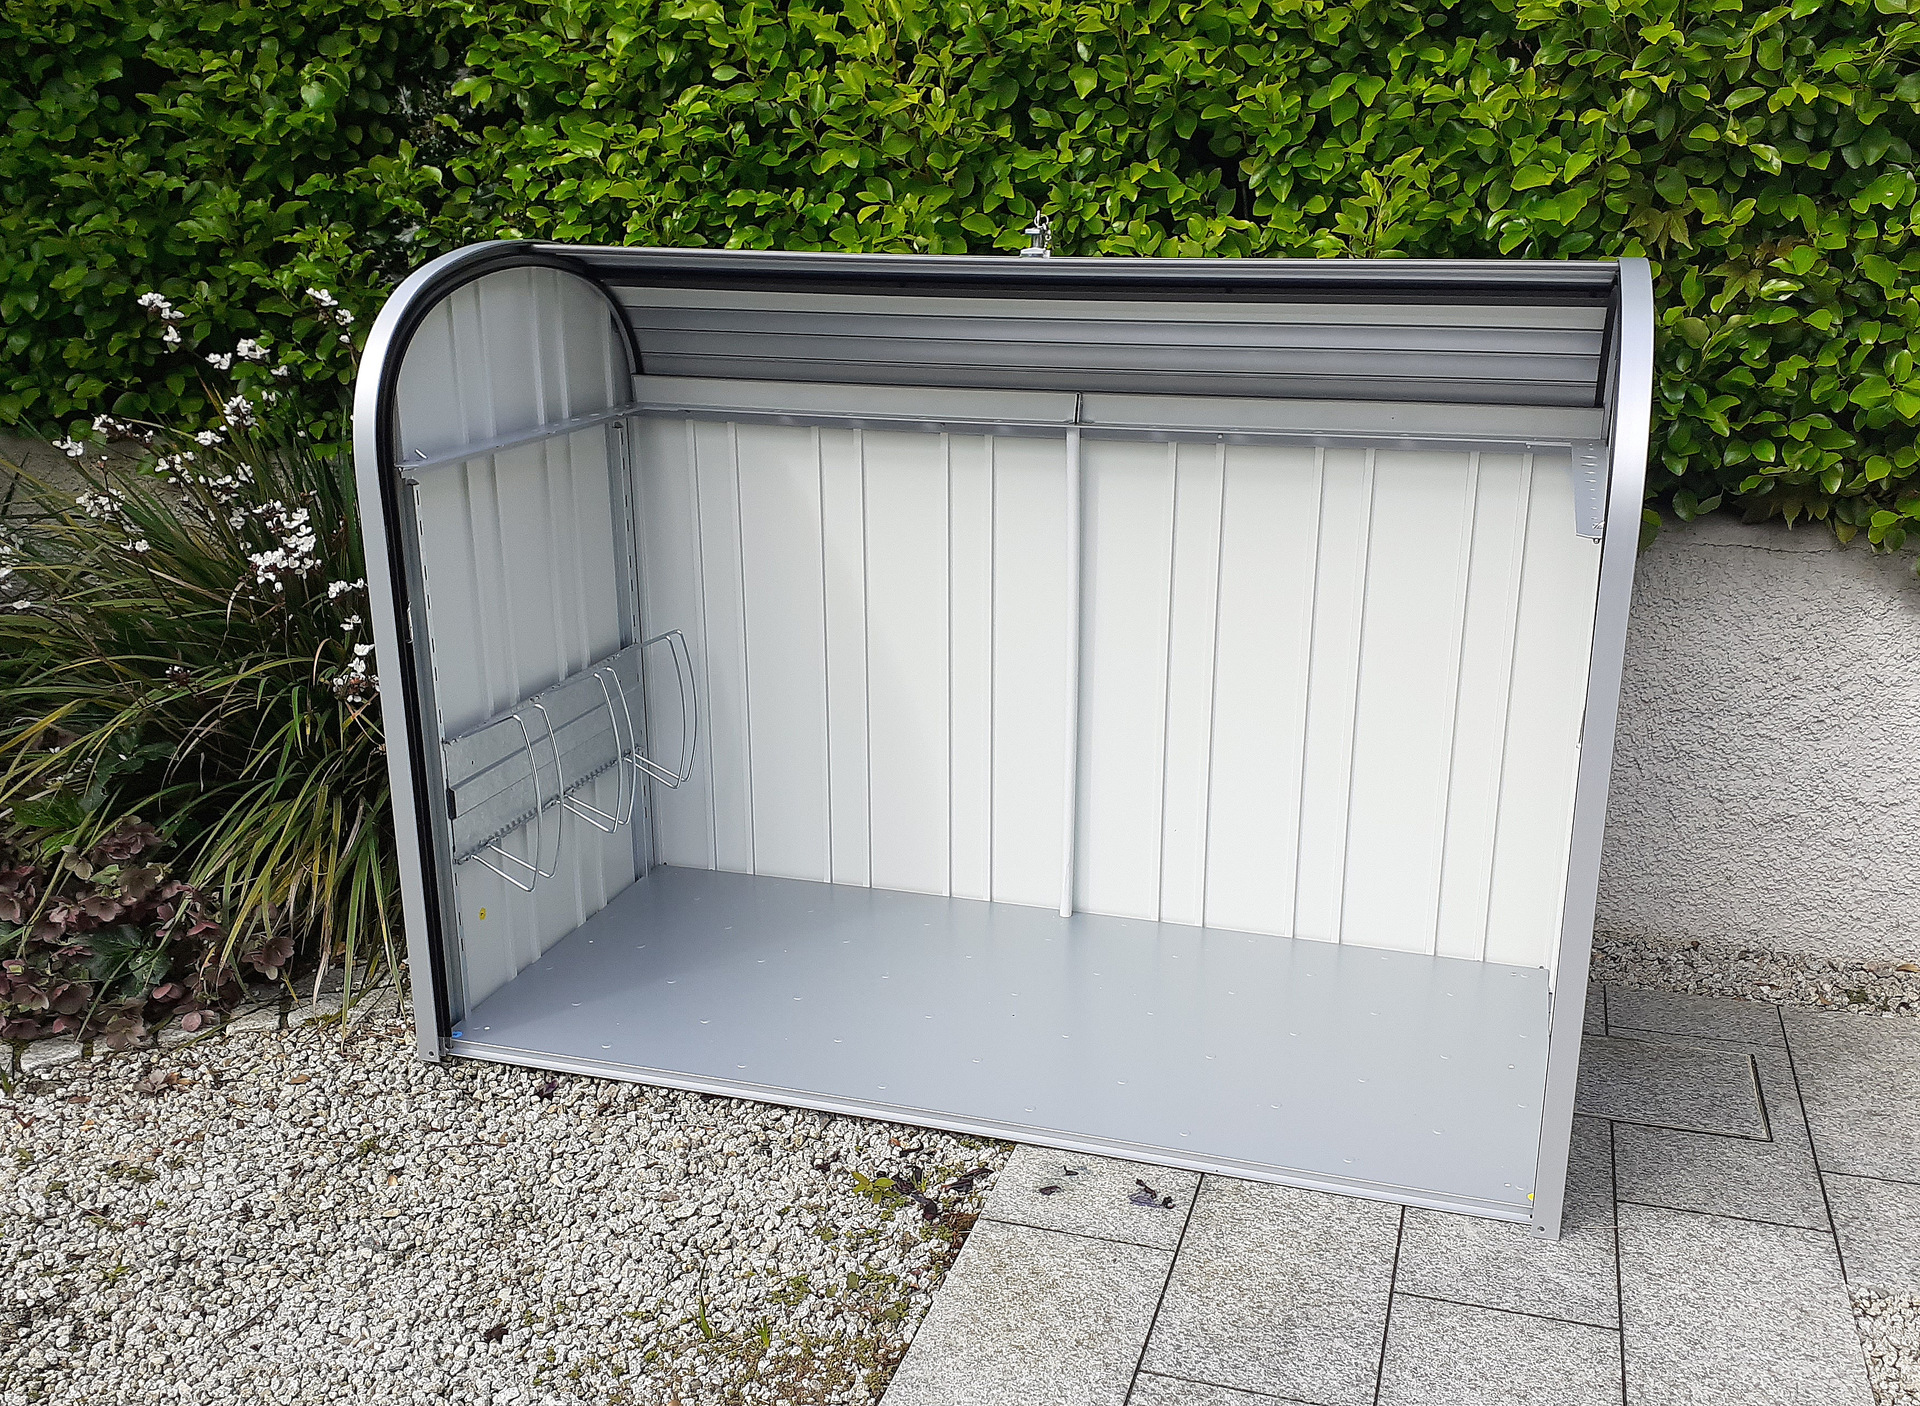 Biohort StoreMax 190, stylish, secure & weatherproof Bike Storage Unit, with the optional 'BikeHolder' accessory, supplied & installed in Donnybrook, Dublin 4  | ORDER TODAY and get FREE Installation (Dublin area).